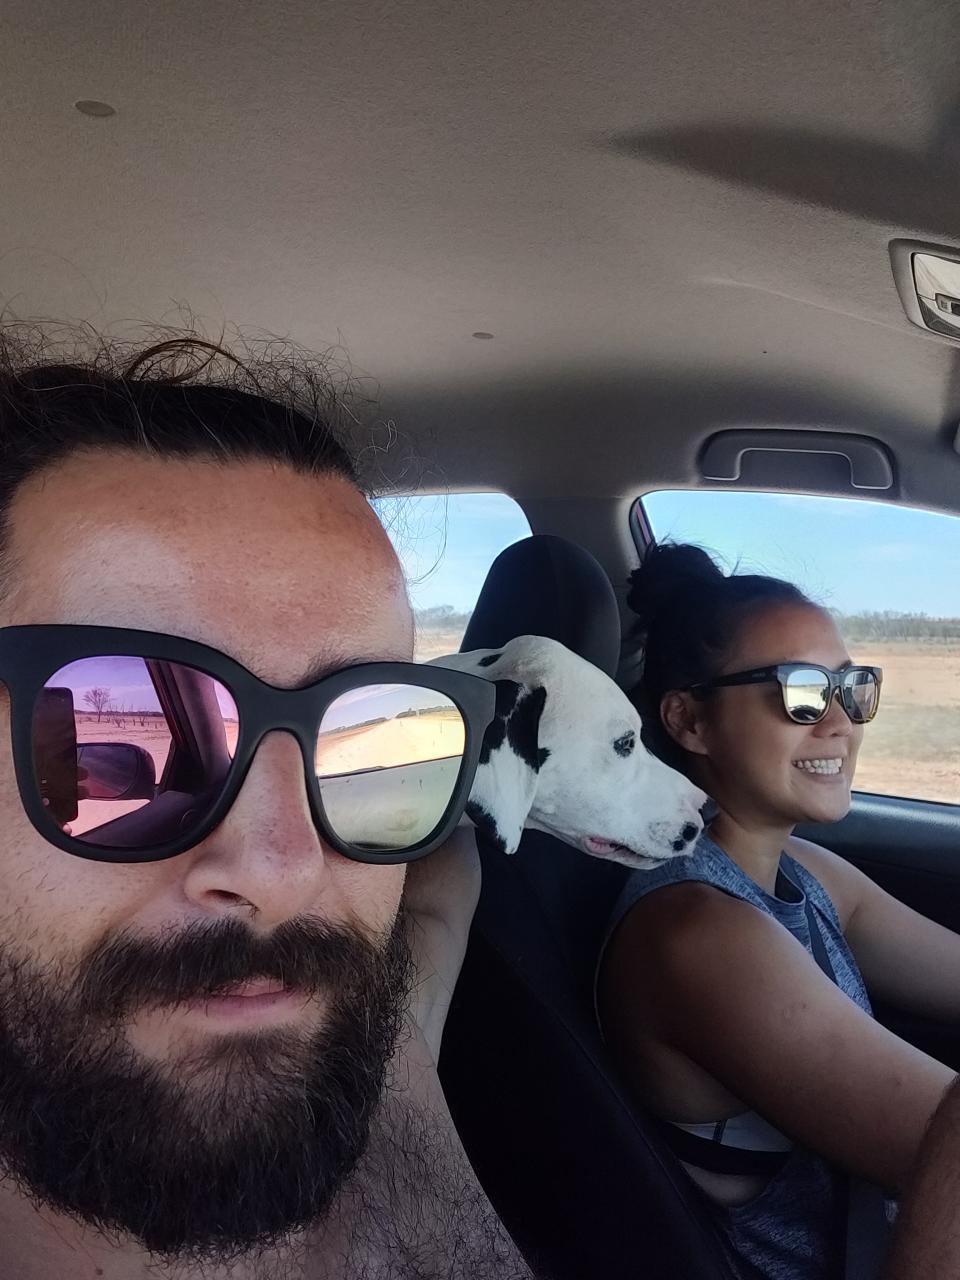 Jose, Nicky and their dog Loki became stranded on their journey from Cairns to Adelaide. Source: Royal Flying Doctor Service